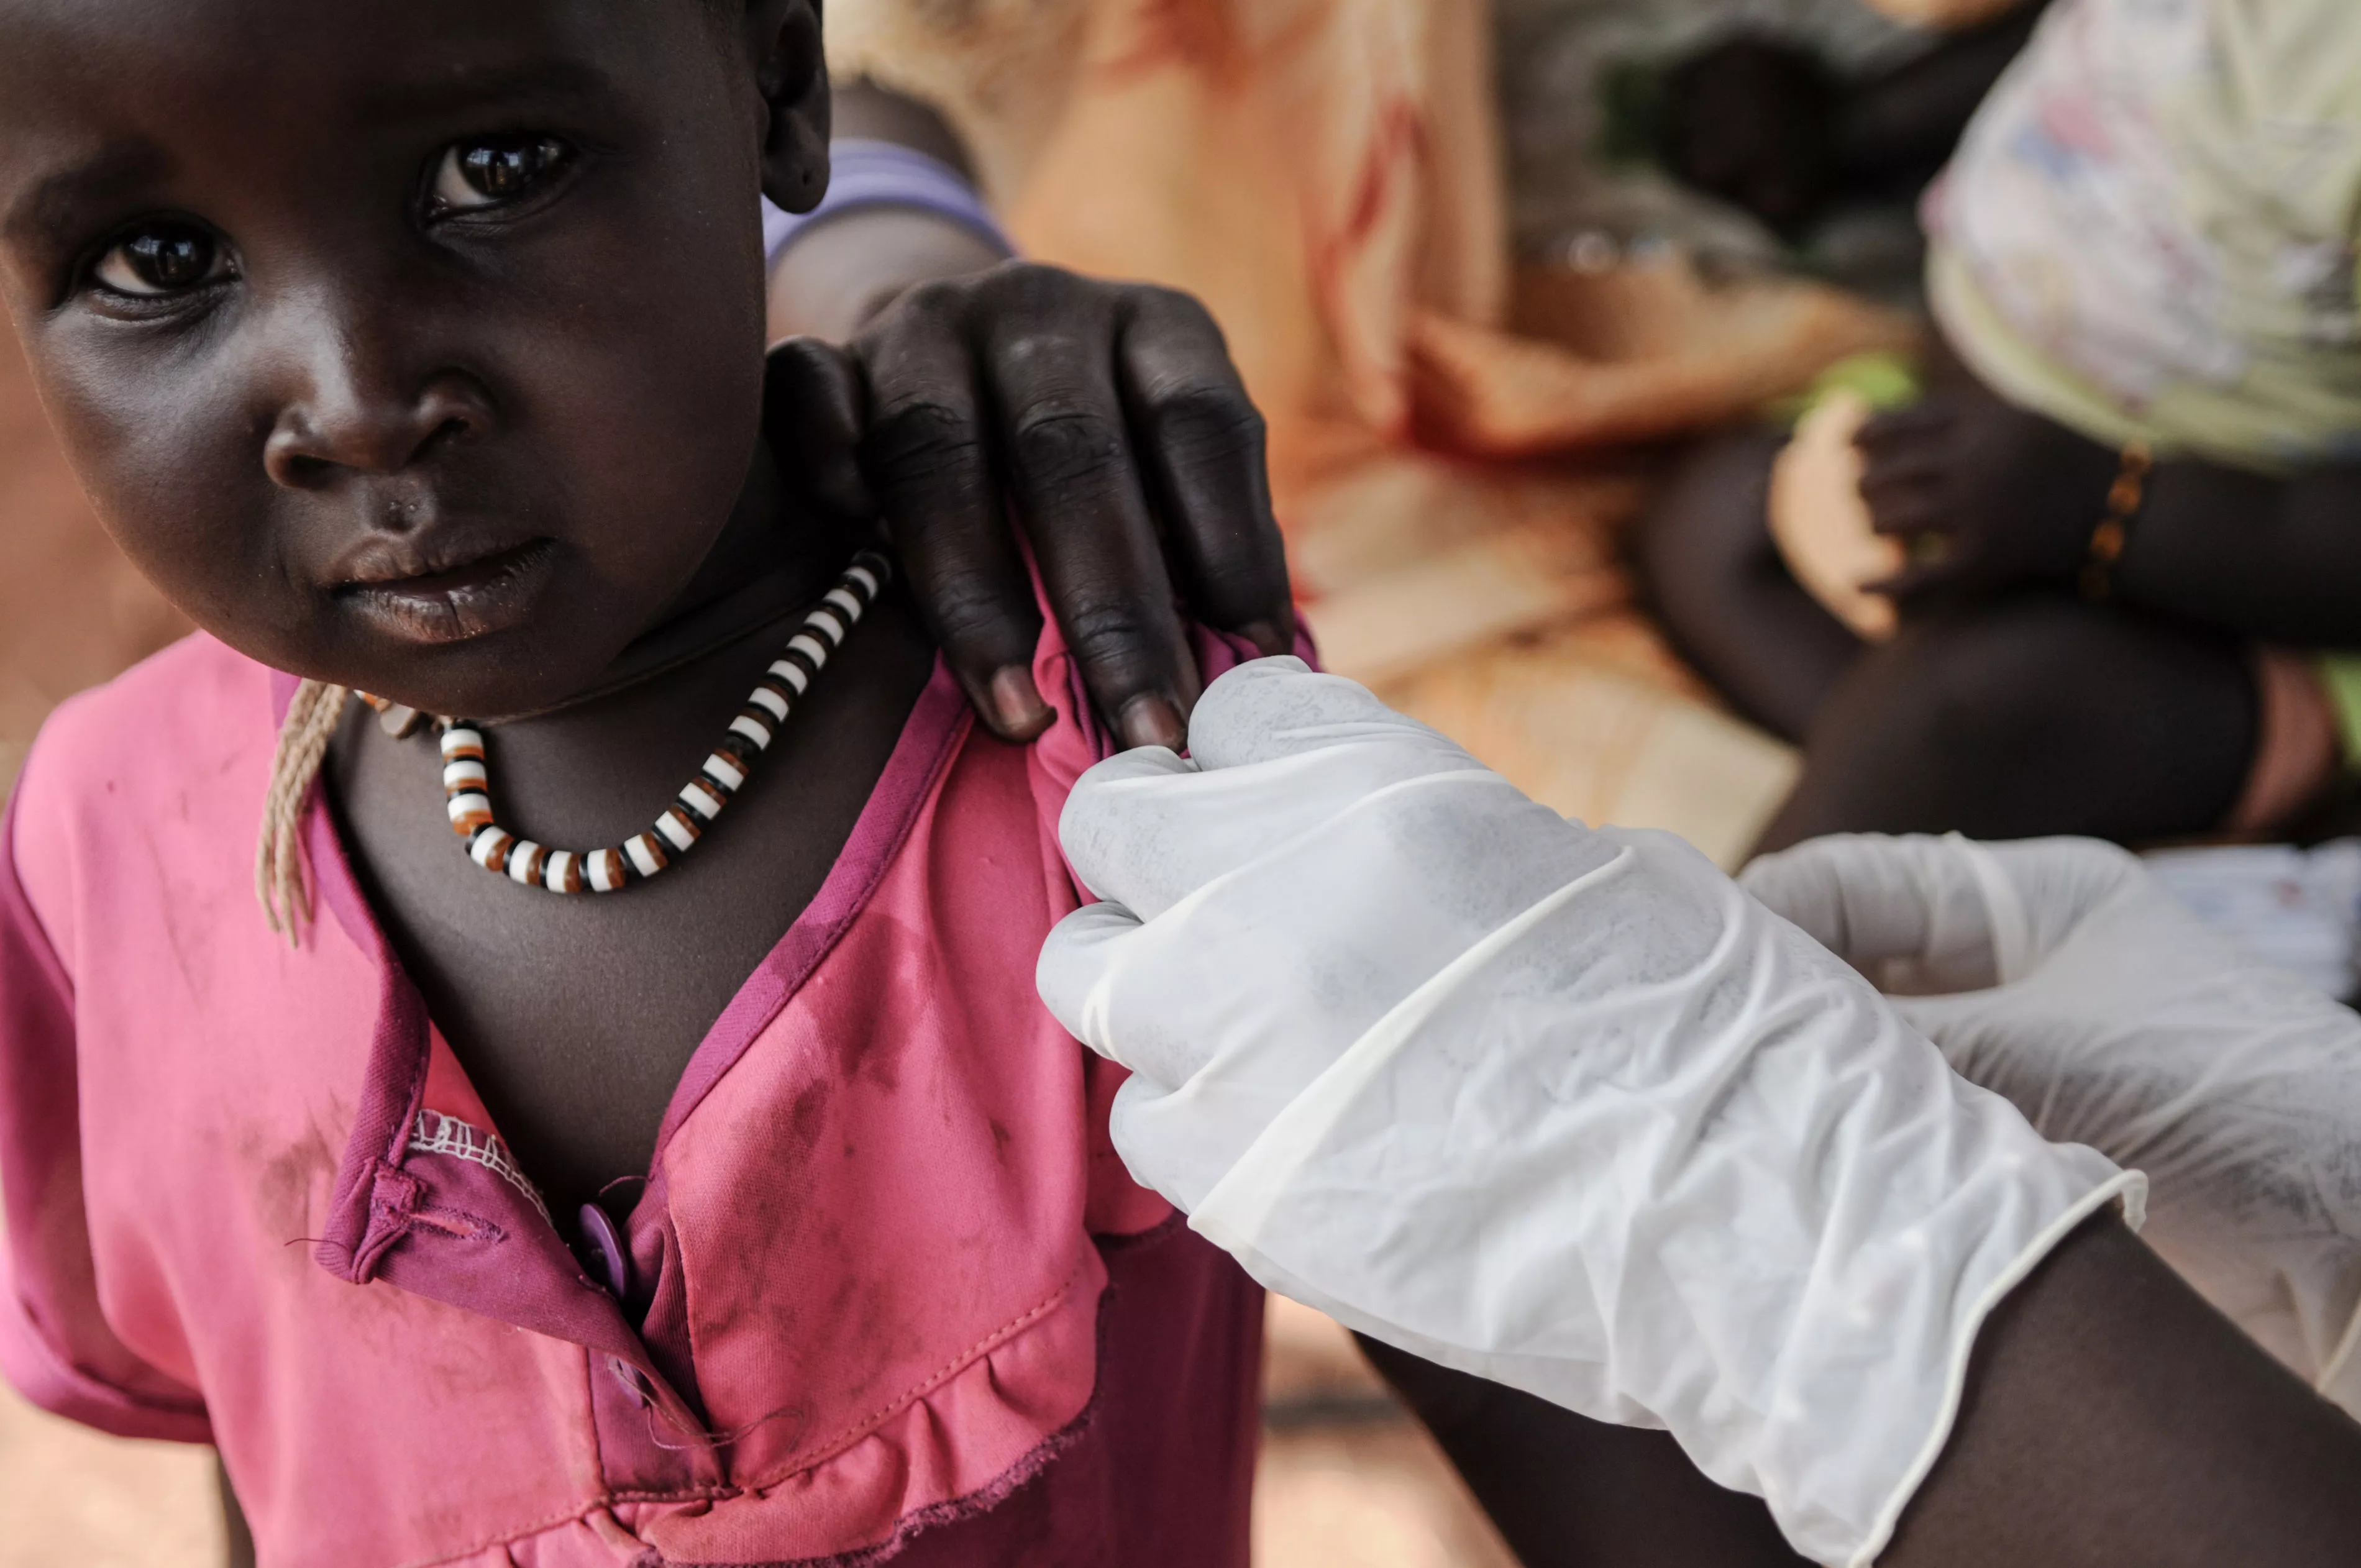 In South Sudan, MSF is present in Yida, next to the border with Sudan. This village hosts a camp of refugees who escaped shellings in South Kordofan. MSF set up a small hospital and a clinics in the refugees'camp in Yida. 